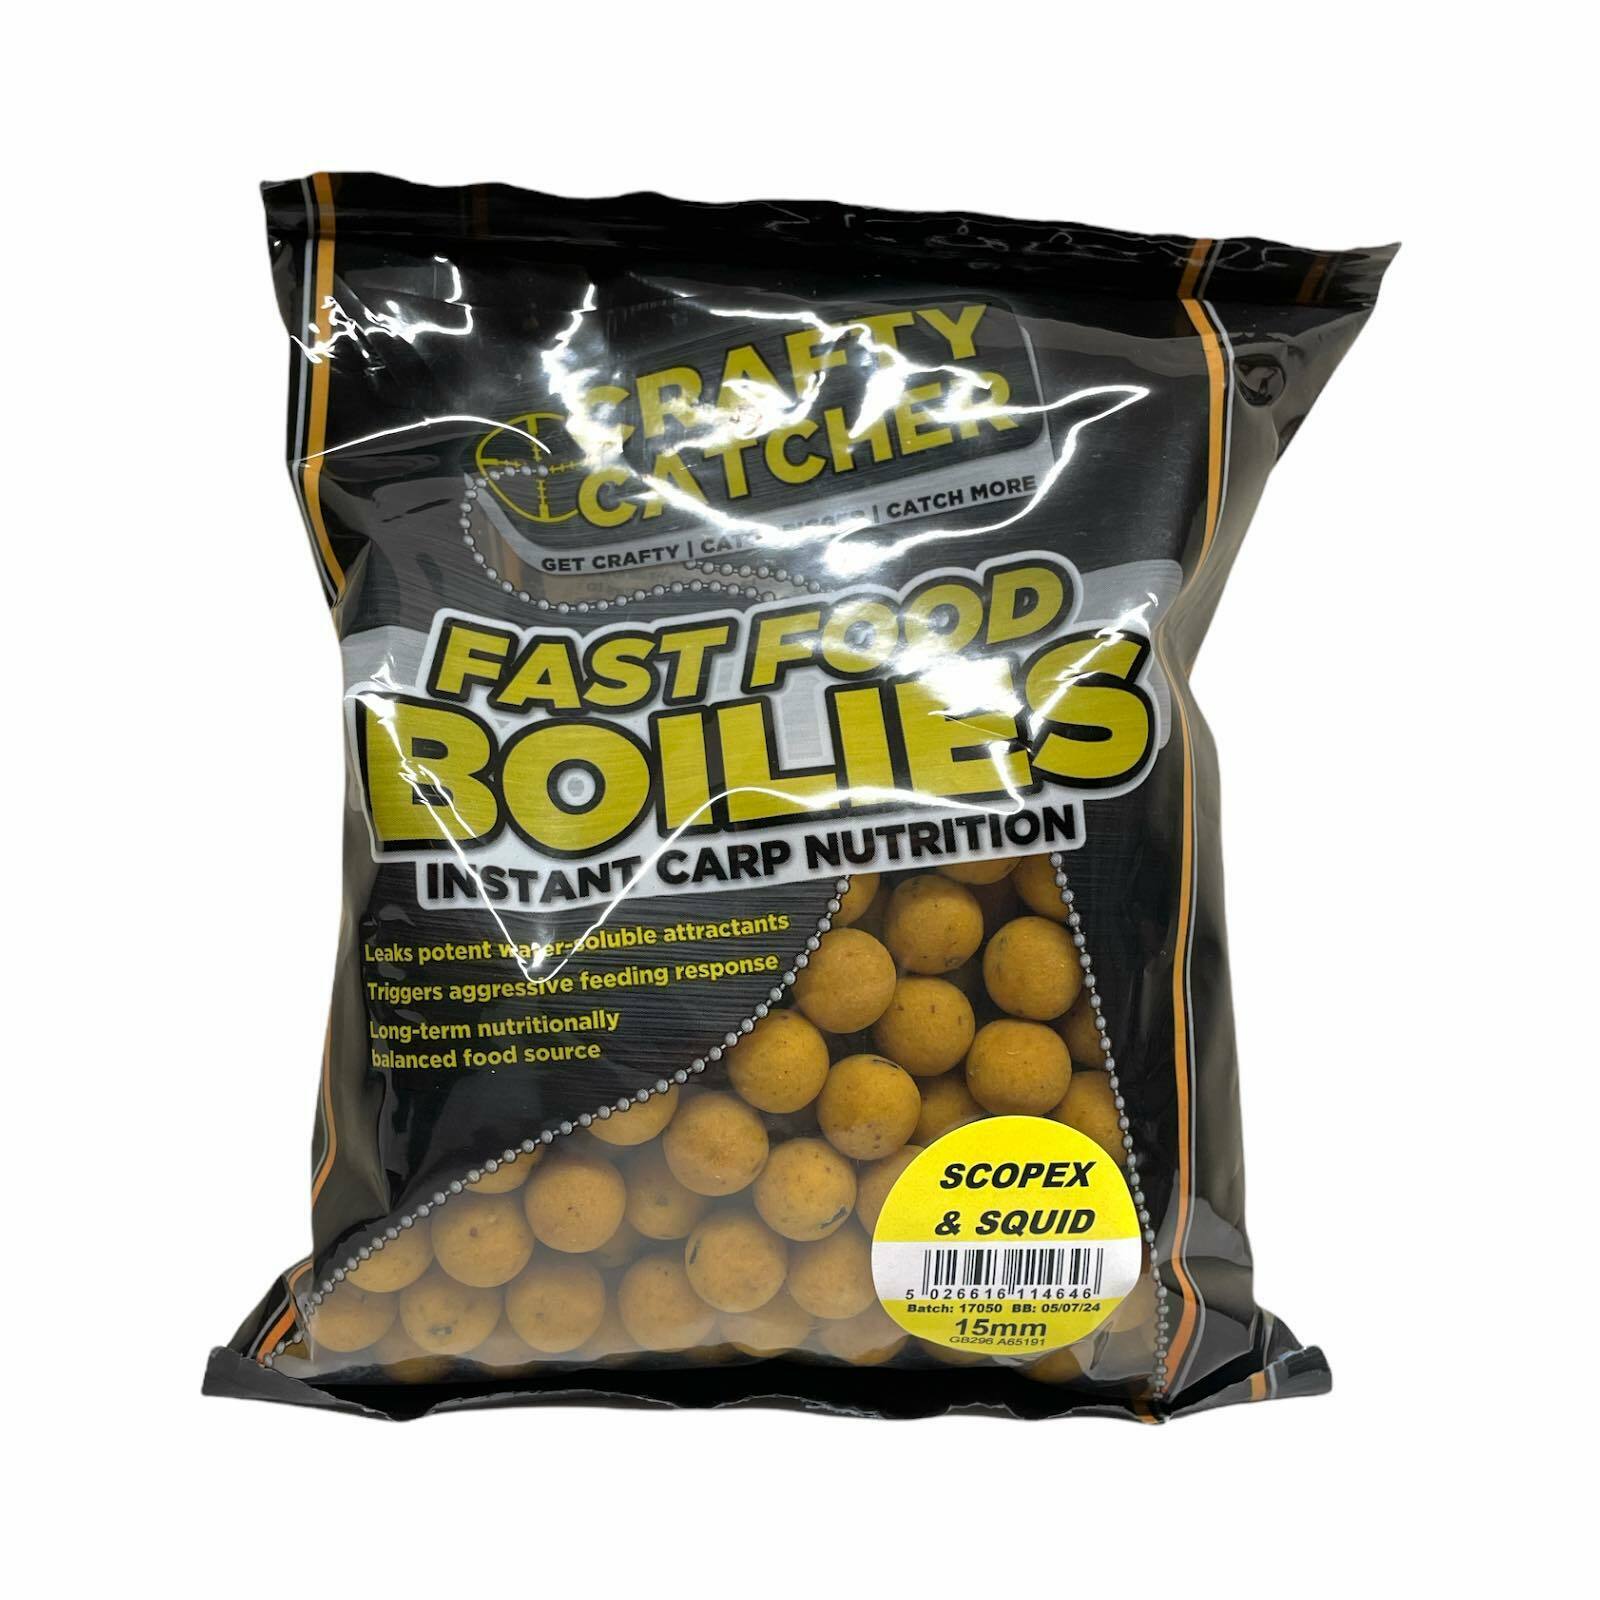 Crafty Catcher Fast Food Boilies